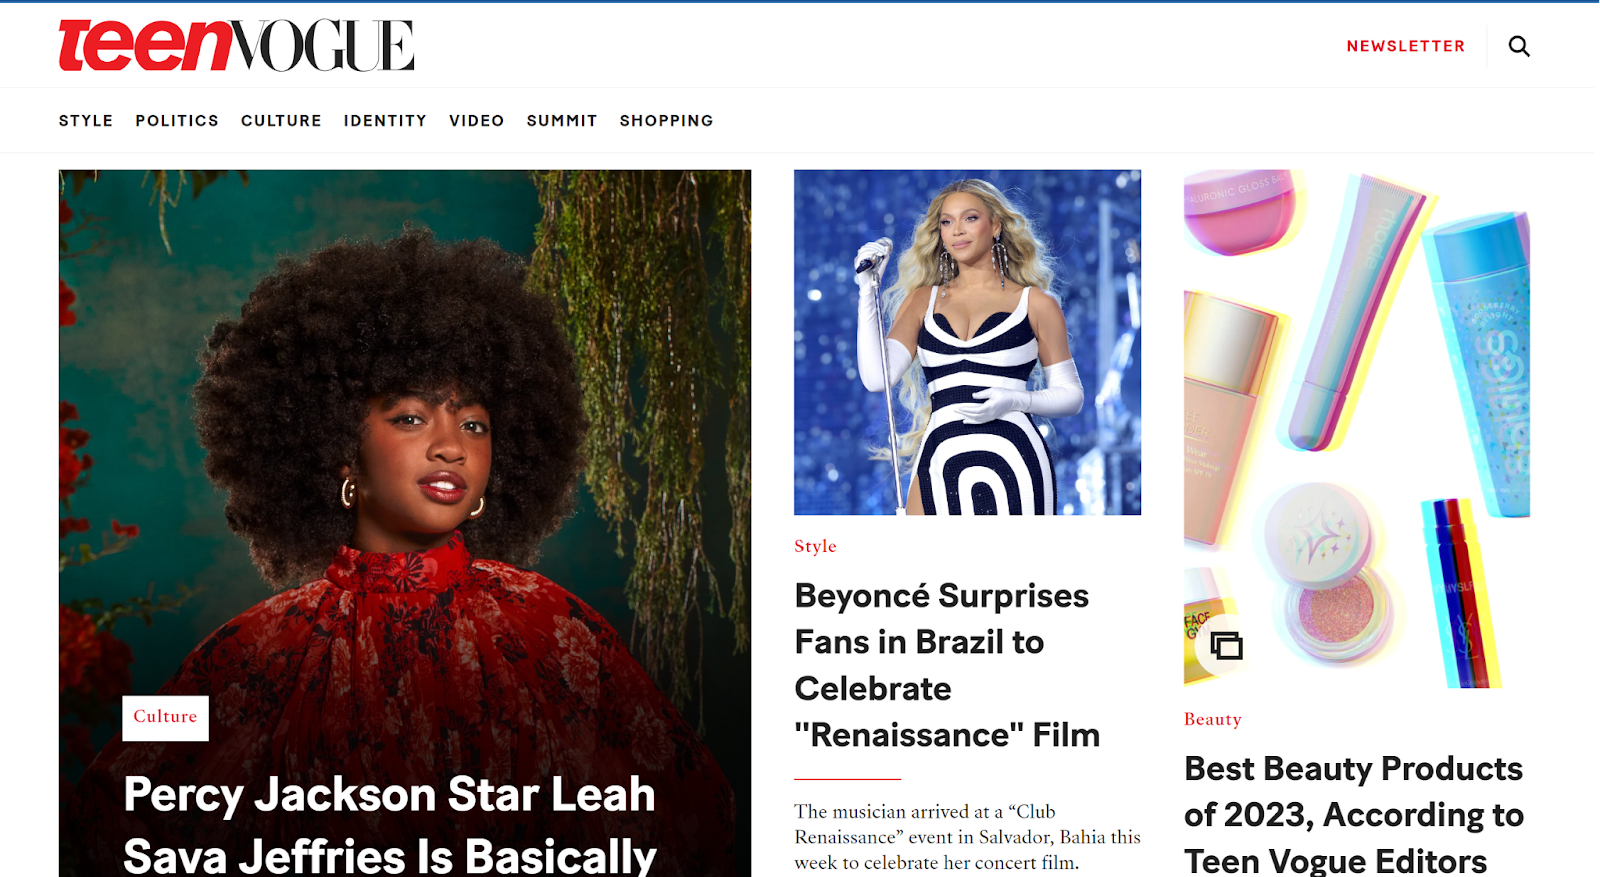 Teen Vogue features content for cultural topics, social issues, politics and much more.